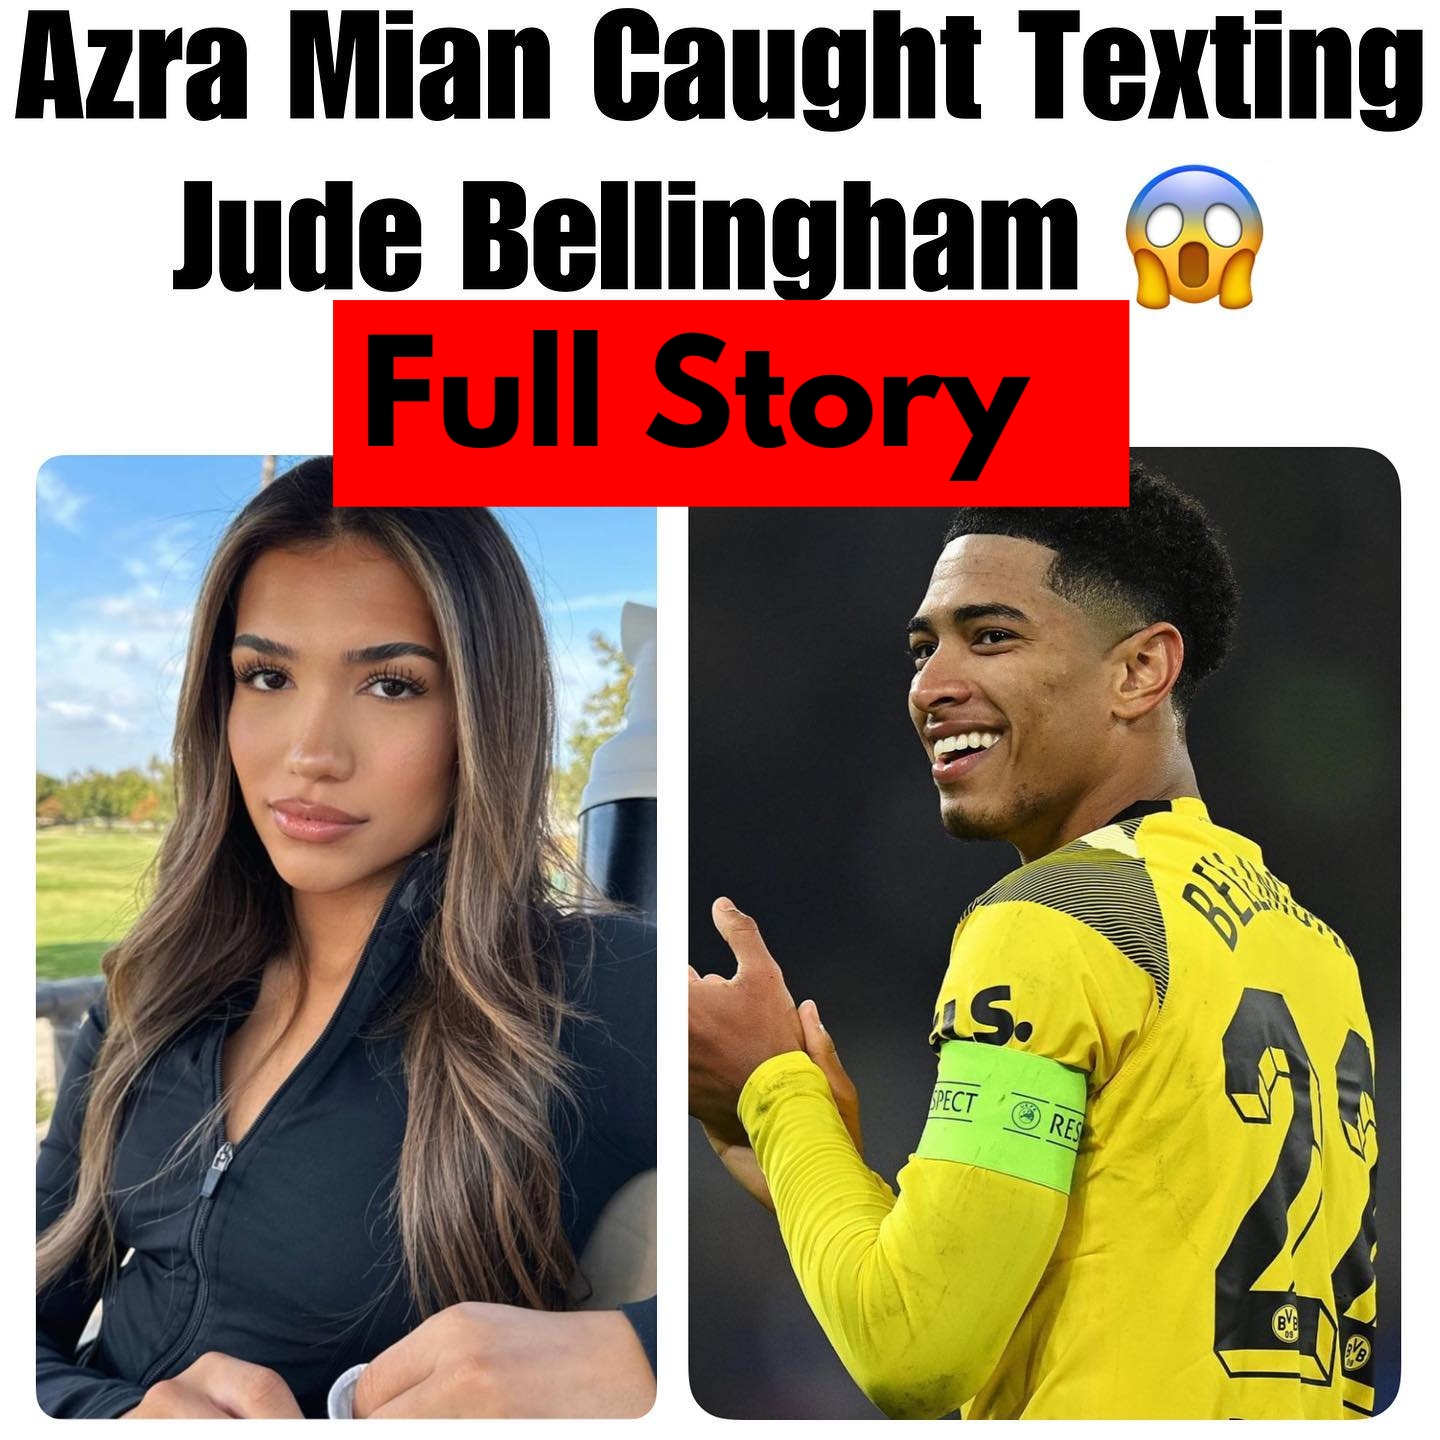 Azra Mian and Jude Bellingham Dating in 2023? : An Unlikely Connection ...